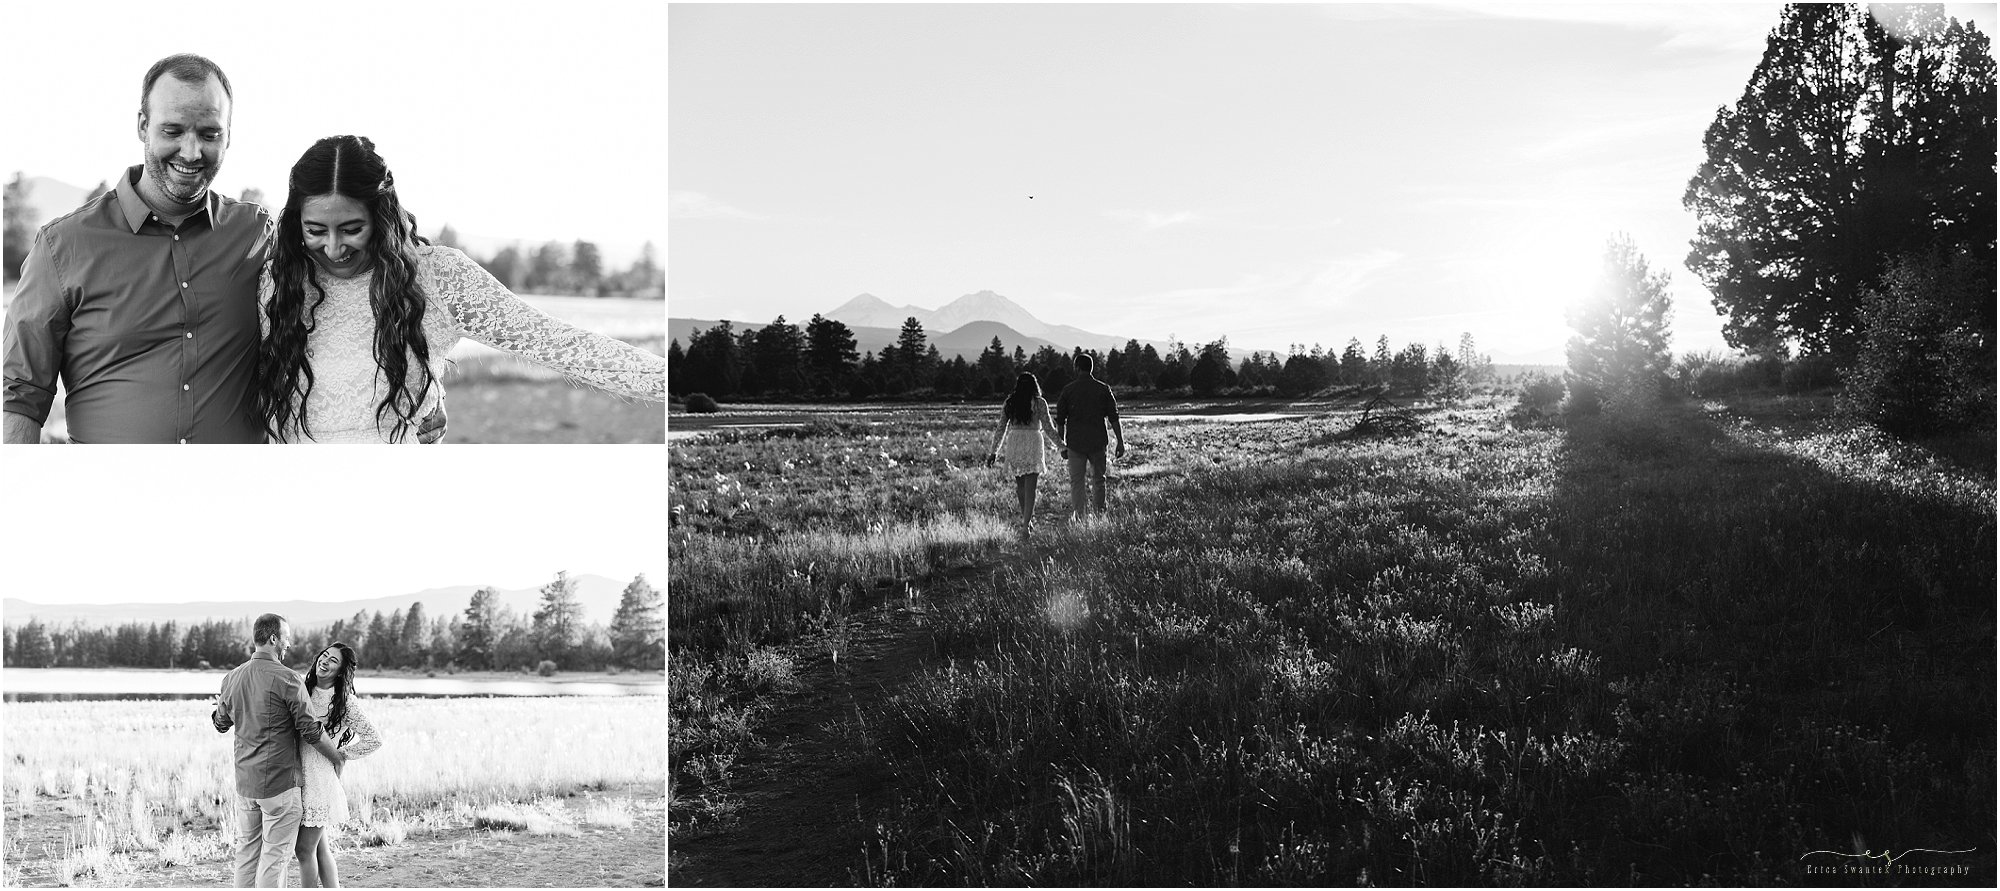 A gorgeous series of black and white images from an engagement photo session near Bend, OR by Bend wedding photographer Erica Swantek Photography. 